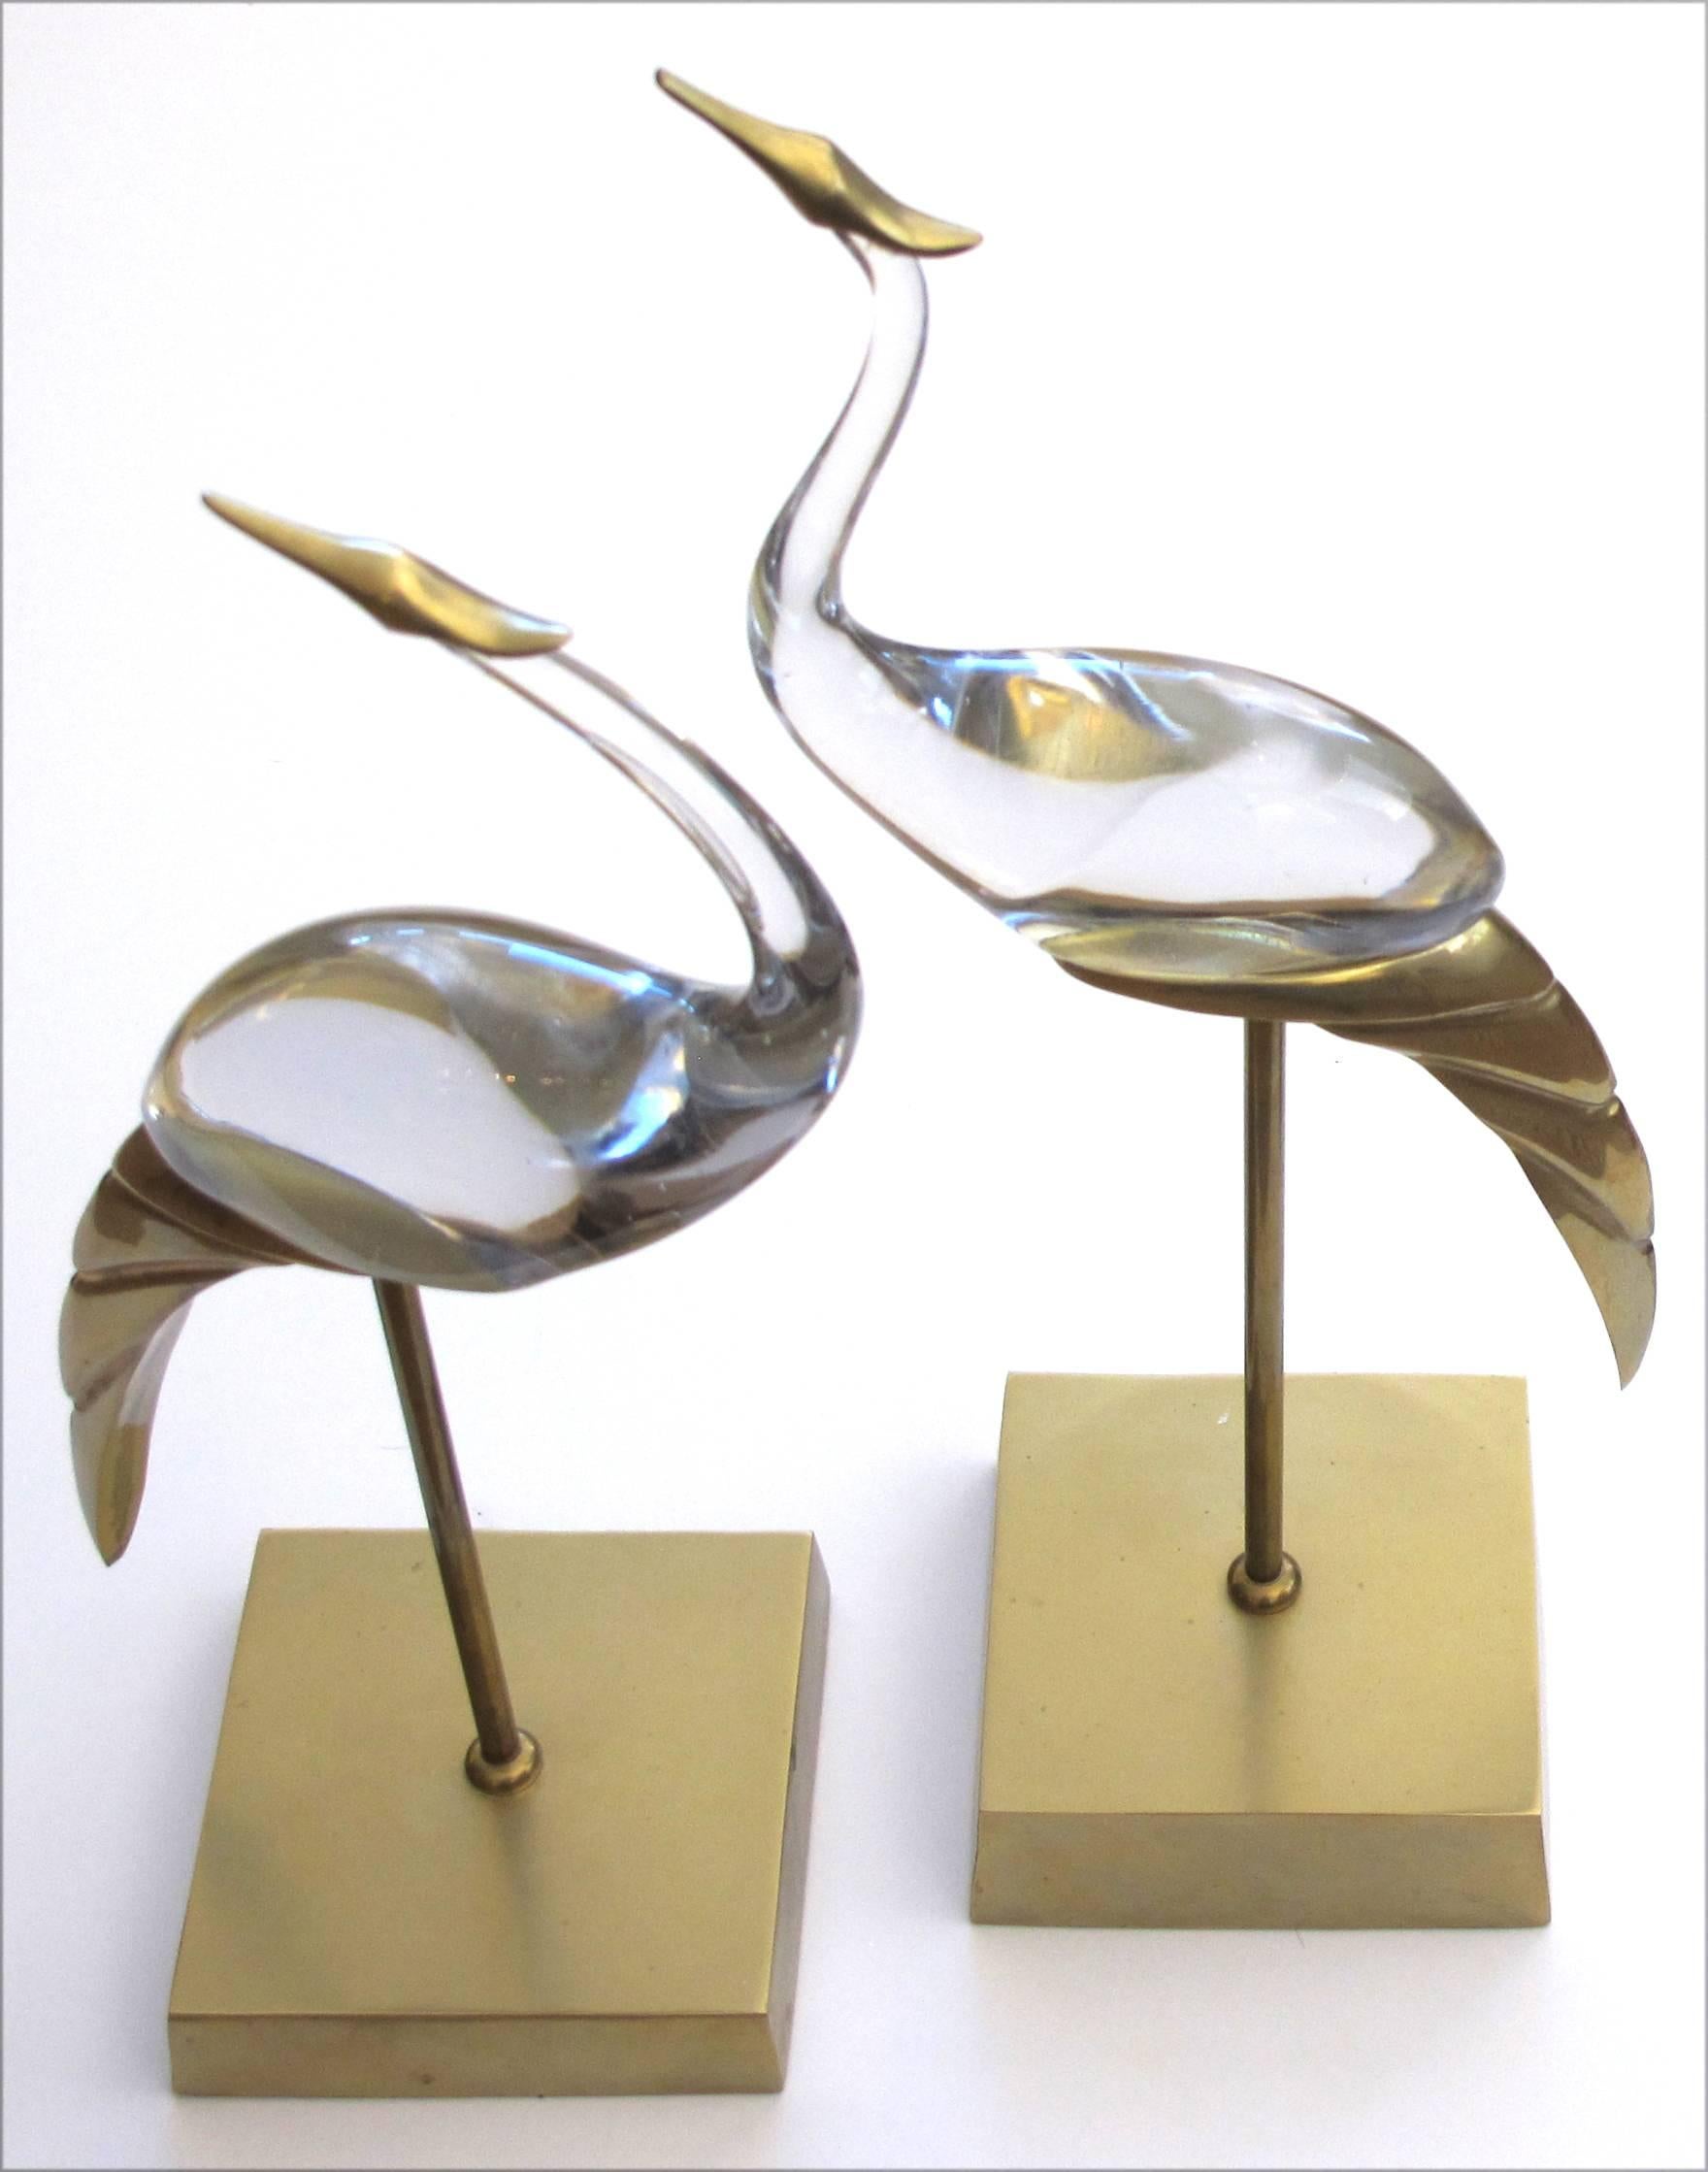 A shimmering and stylized pair of Italian Mid-Century brass and glass standing cranes by Luca Bojola; each elegantly poised bird with stylized bodies resting on brass plinths.